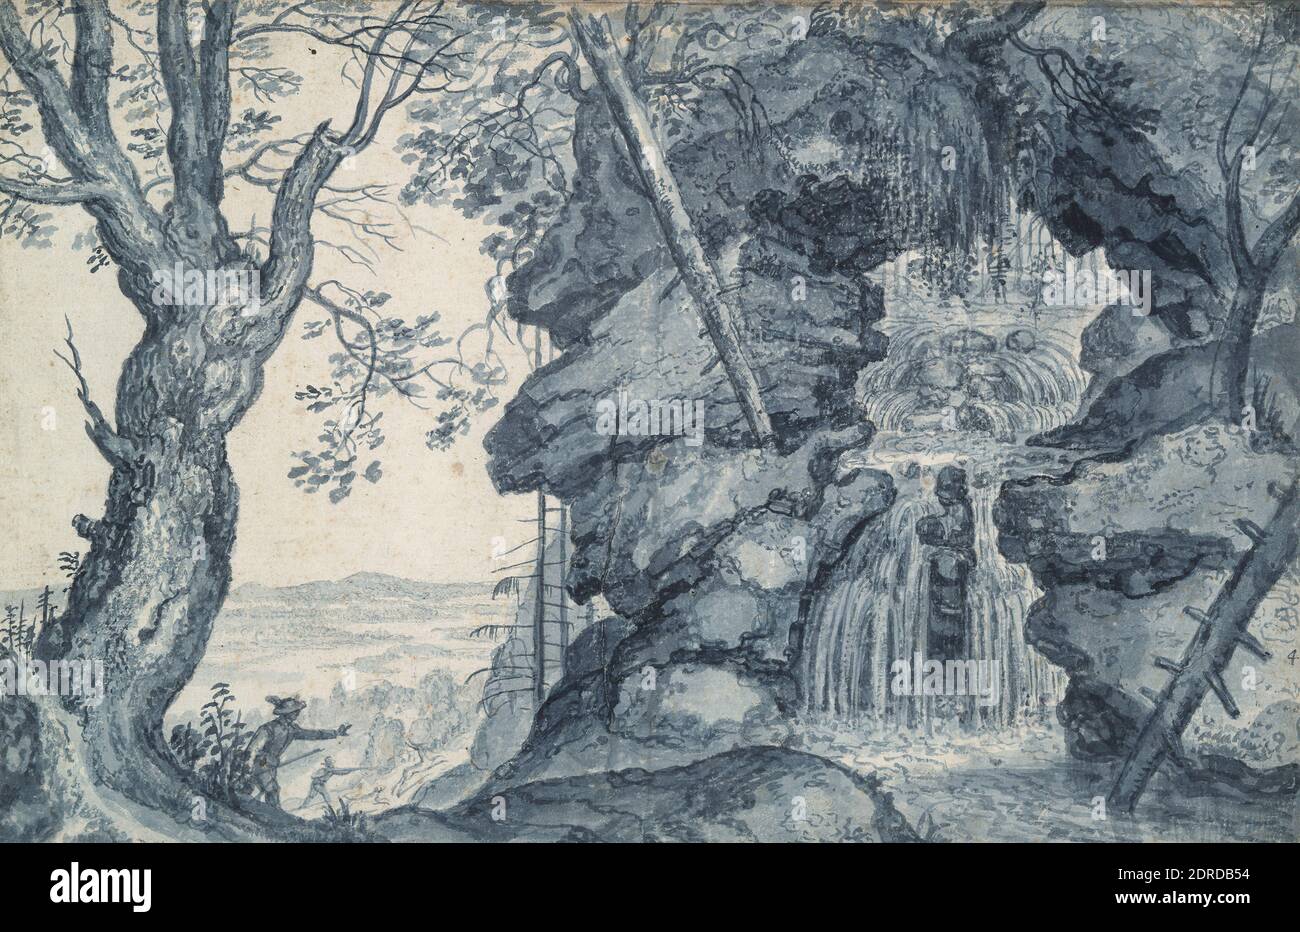 Artist, possibly by: Paul Bril, Flemish, 1554–1626, Artist, formerly attributed to: Roelandt Savery, Dutch, 1576–1639, Artist, formerly attributed to: Jacob Savery II, Flemish, 1545–1602, Rocky Landscape with Waterfall and Hunters, 17th century, Brush and blue ink and blue wash over preliminary drawing in black chalk, sheet: 23.8 × 36.3 cm (9 3/8 × 14 5/16 in.), Made in The Netherlands, Dutch or Flemish, 17th century, Works on Paper - Drawings and Watercolors Stock Photo